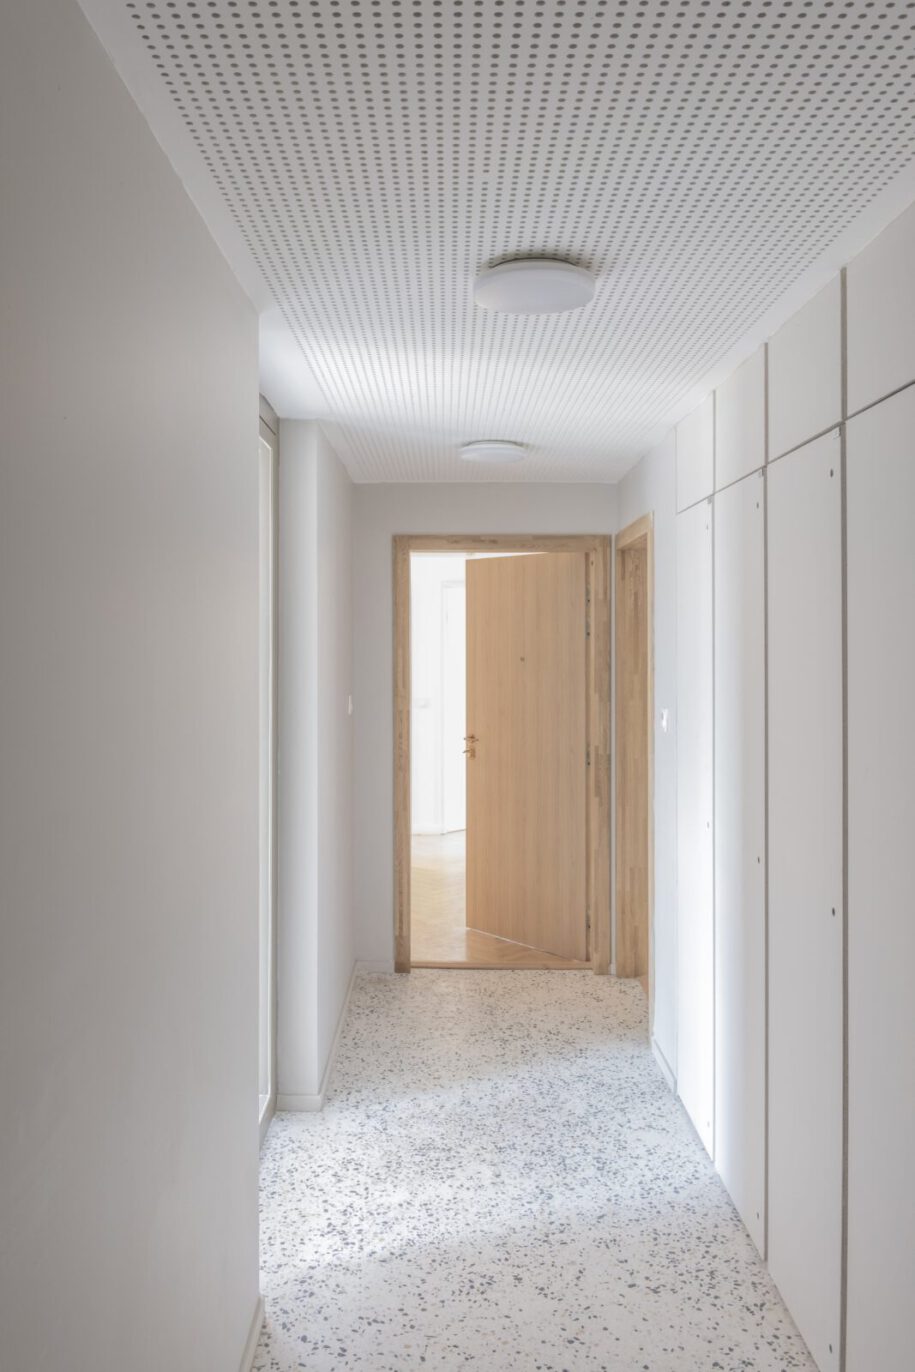 Archisearch Avenier Cornejo Architects completed a social housing development in the oldest Paris' street